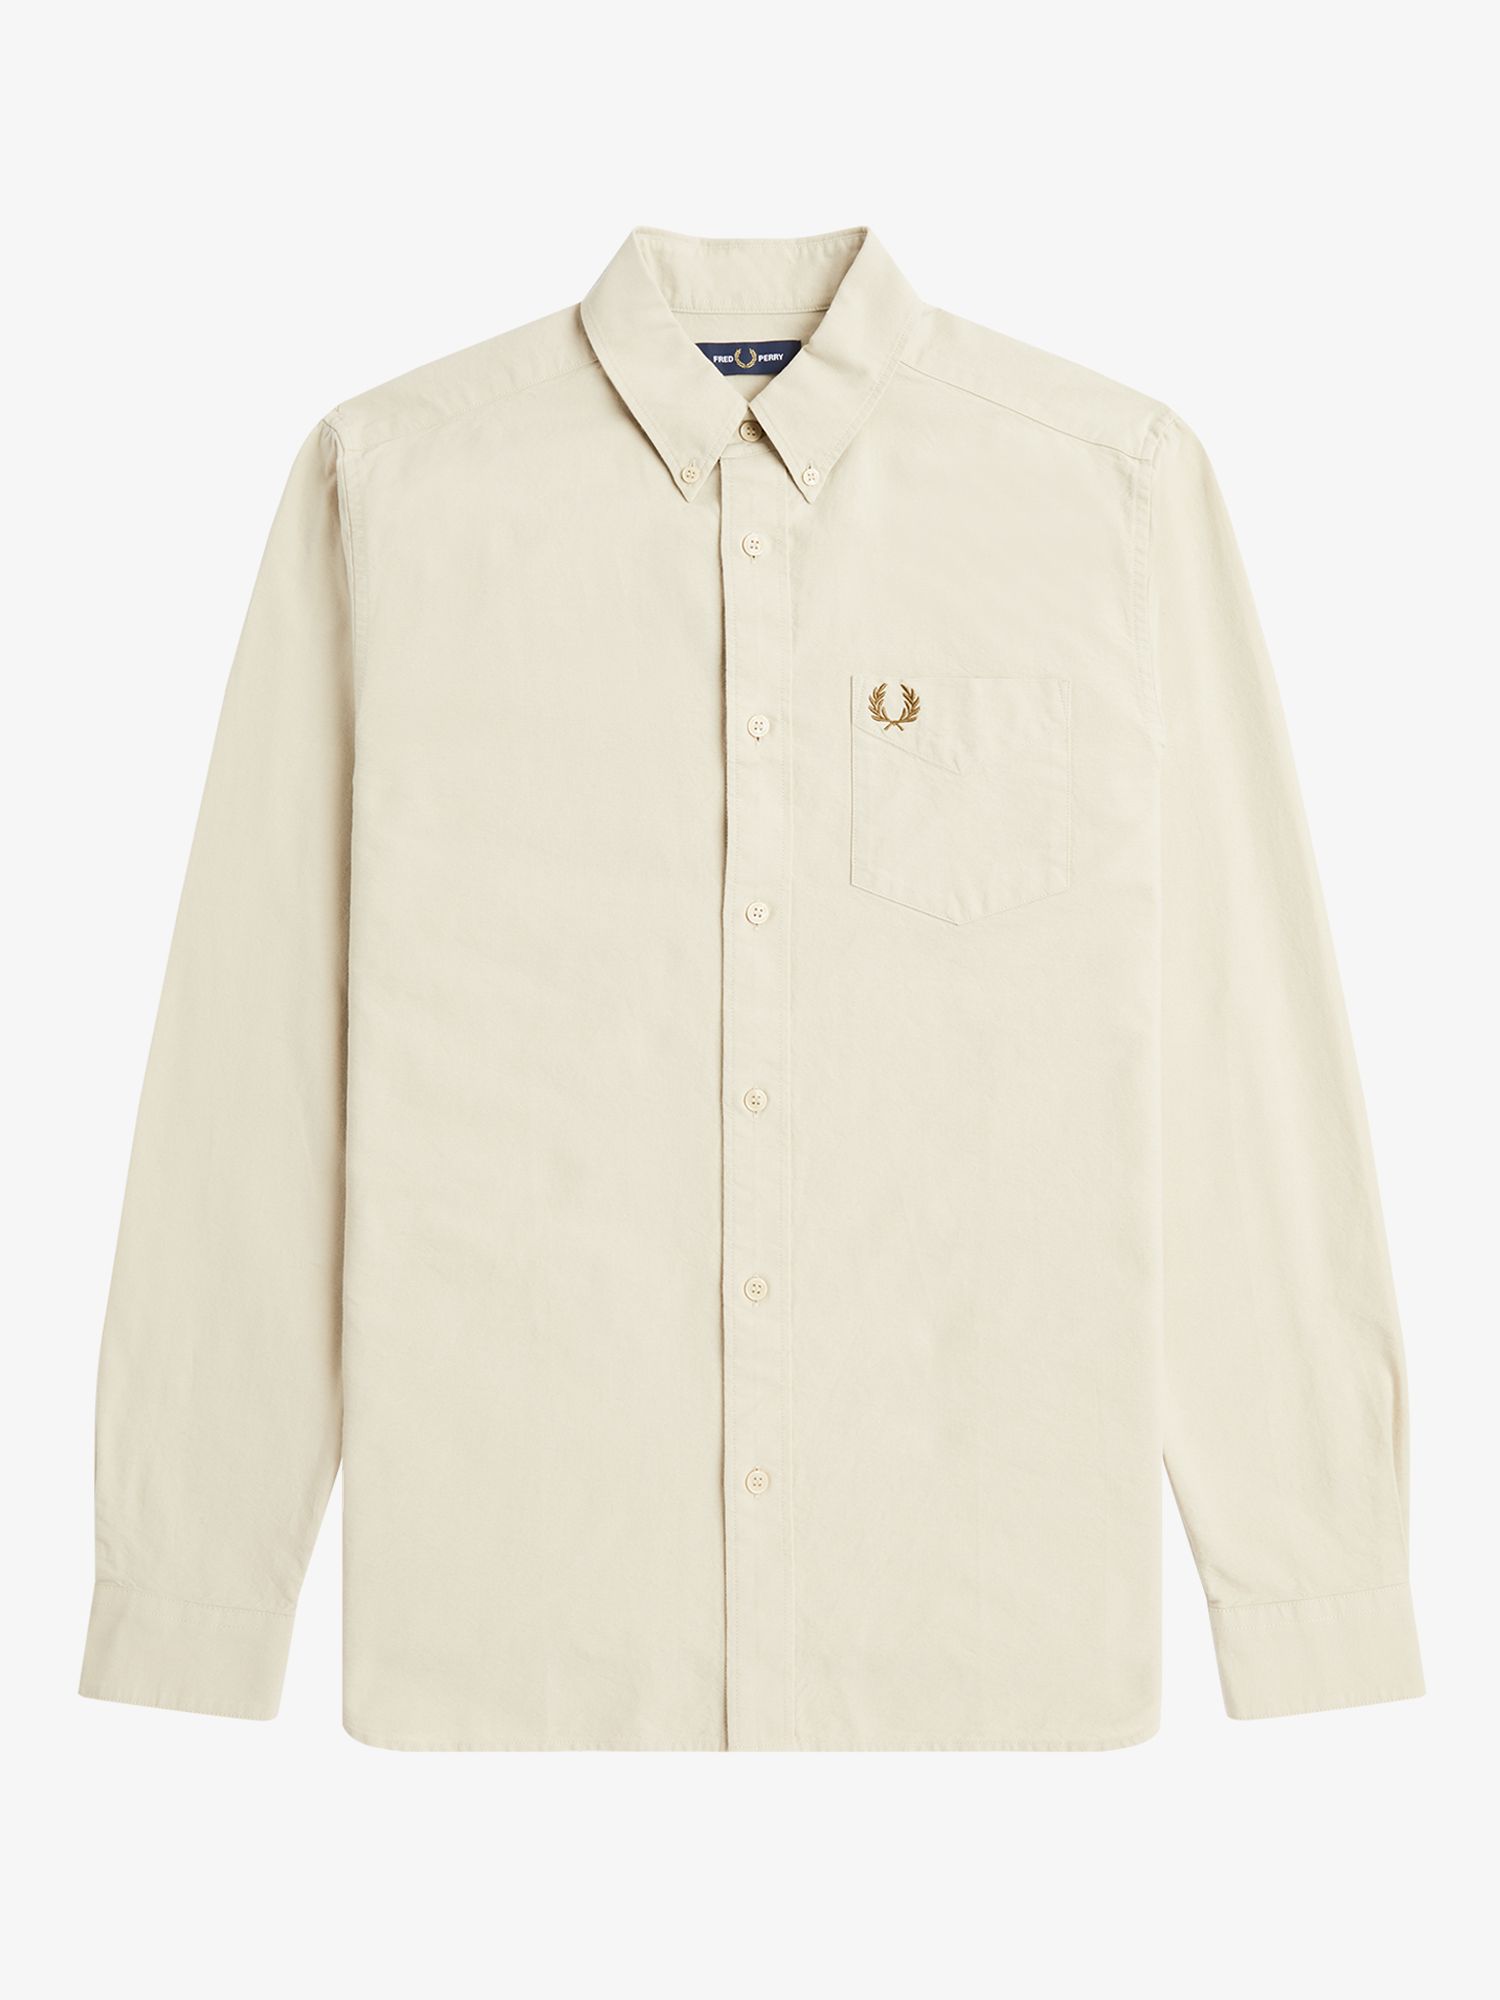 Fred Perry Oxford Shirt, Oatmeal, XXL